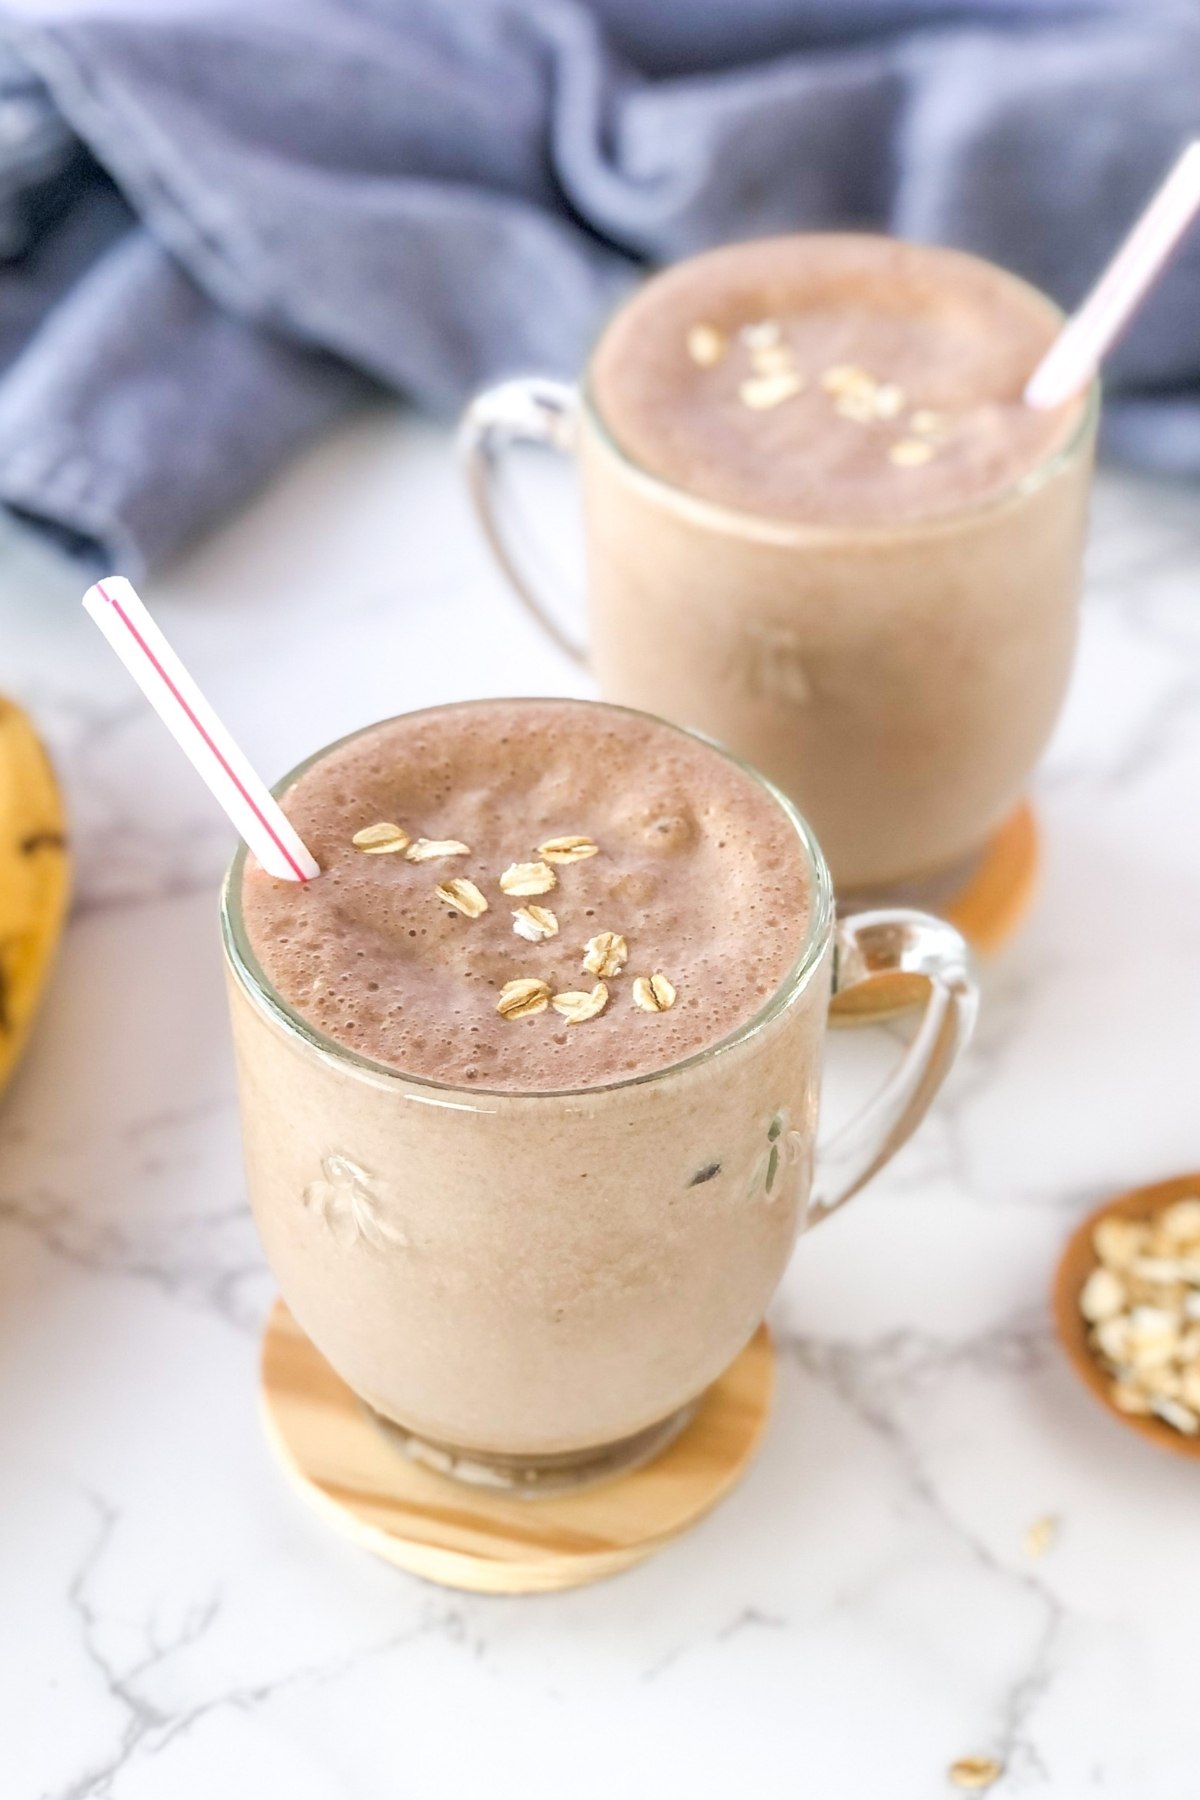 banana Nutella oatmeal smoothie with a blue kitchen towel